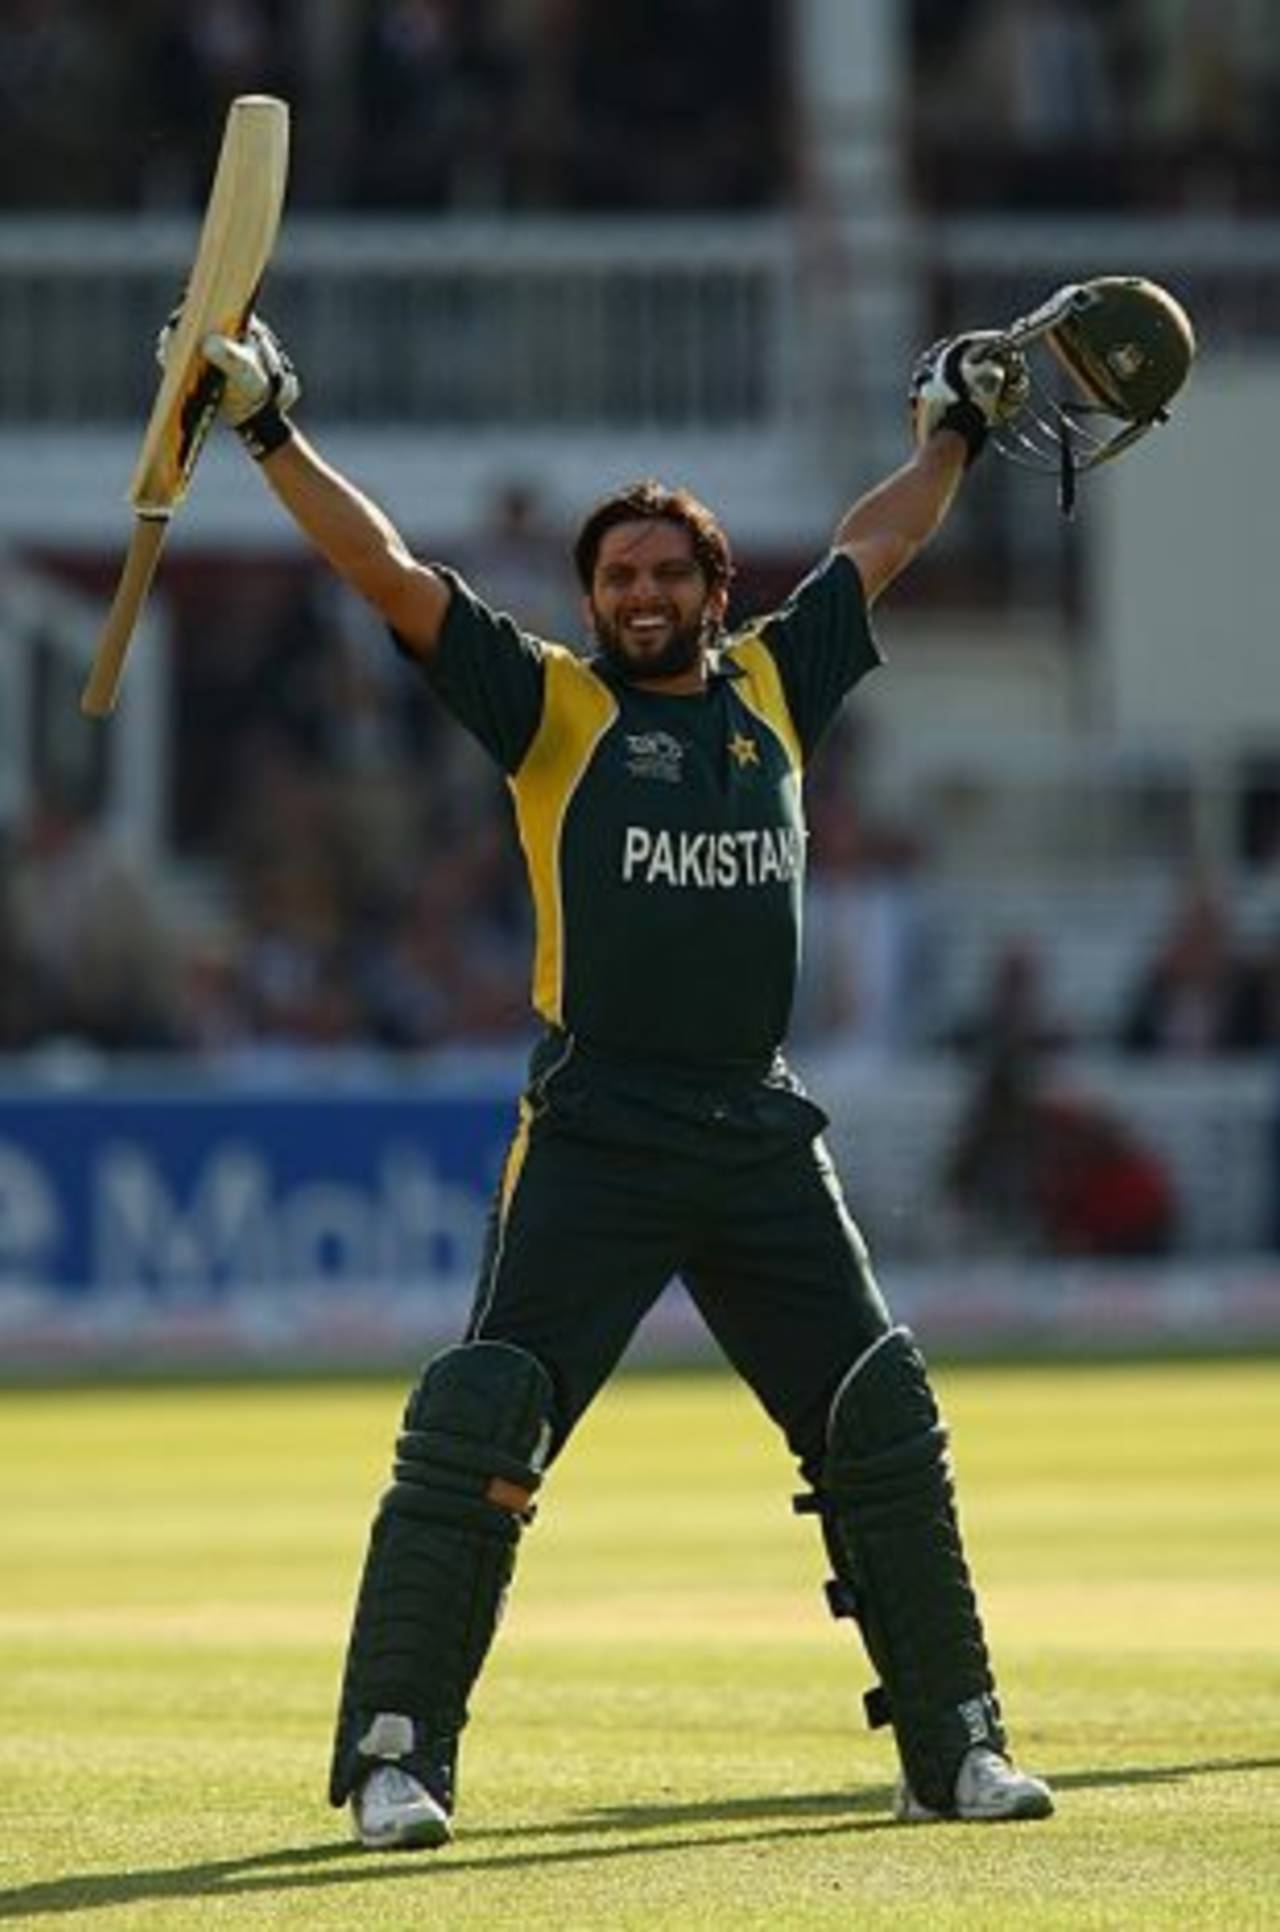 Shahid Afridi's pose after sealing the win was that of a winner who had known the inevitability of victory&nbsp;&nbsp;&bull;&nbsp;&nbsp;Getty Images